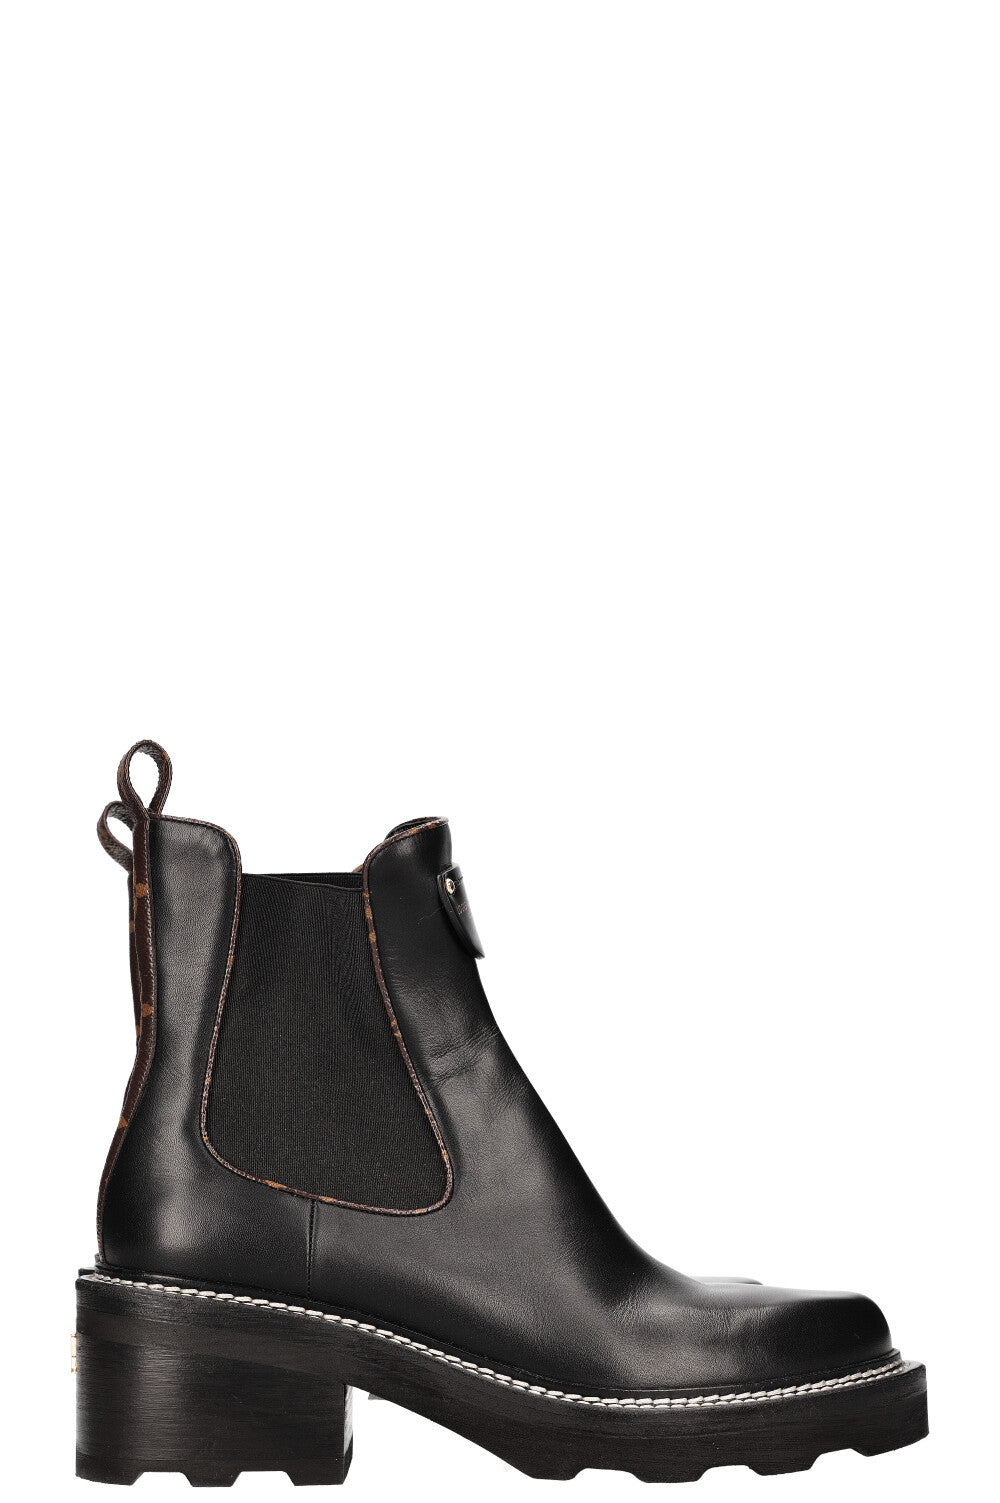 Shop Louis Vuitton Lv Beaubourg Ankle Boot (1A8949) by ReiReina